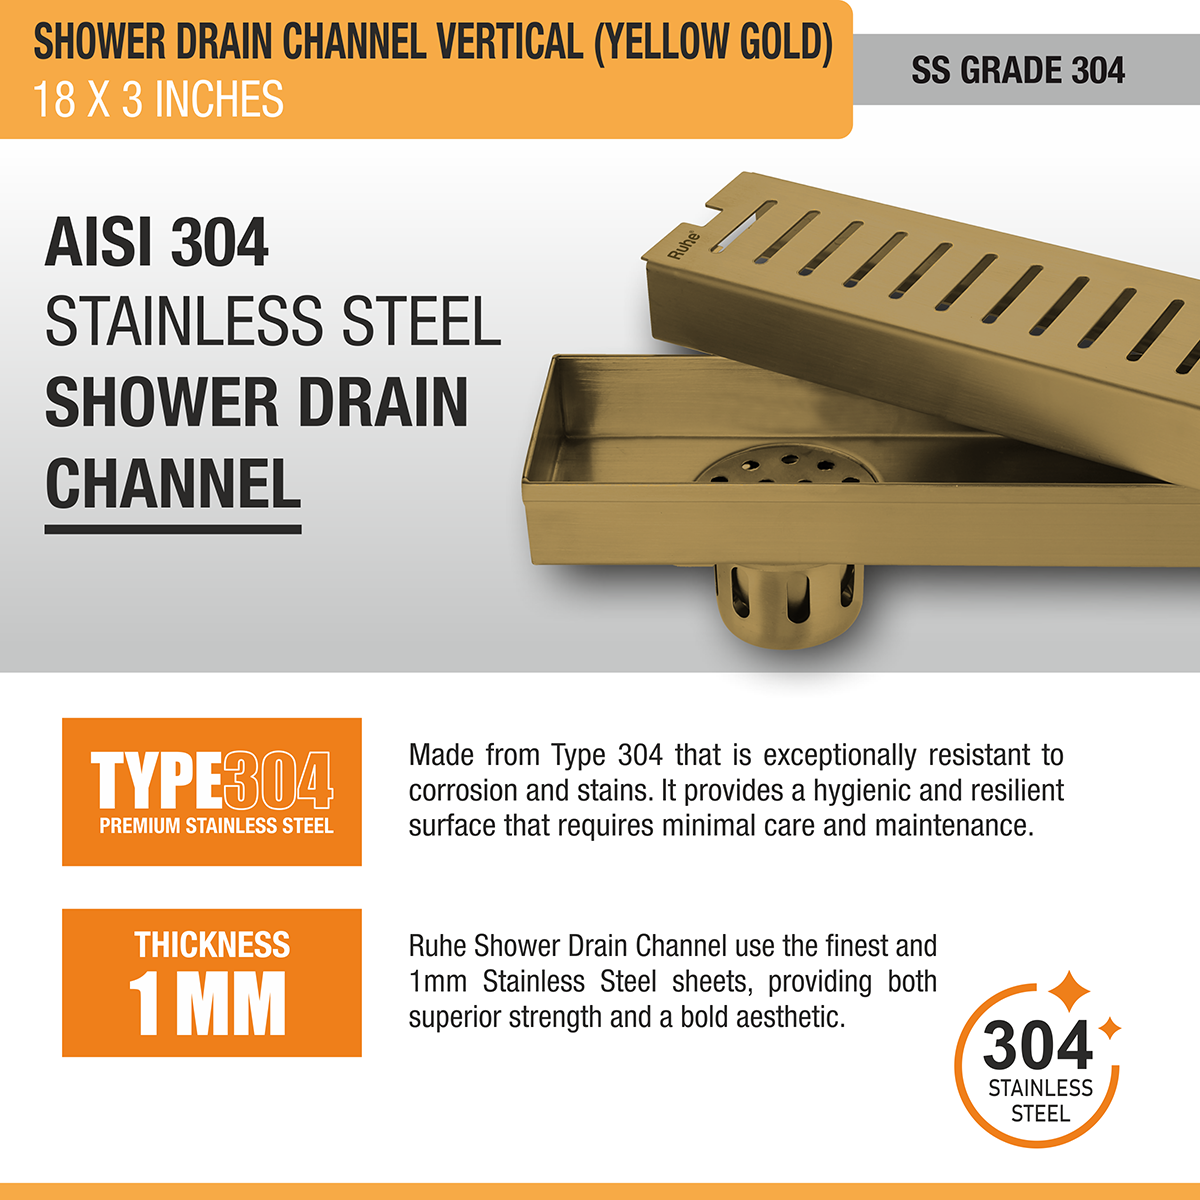 Vertical Shower Drain Channel (18 x 3 Inches) YELLOW GOLD stainless steel